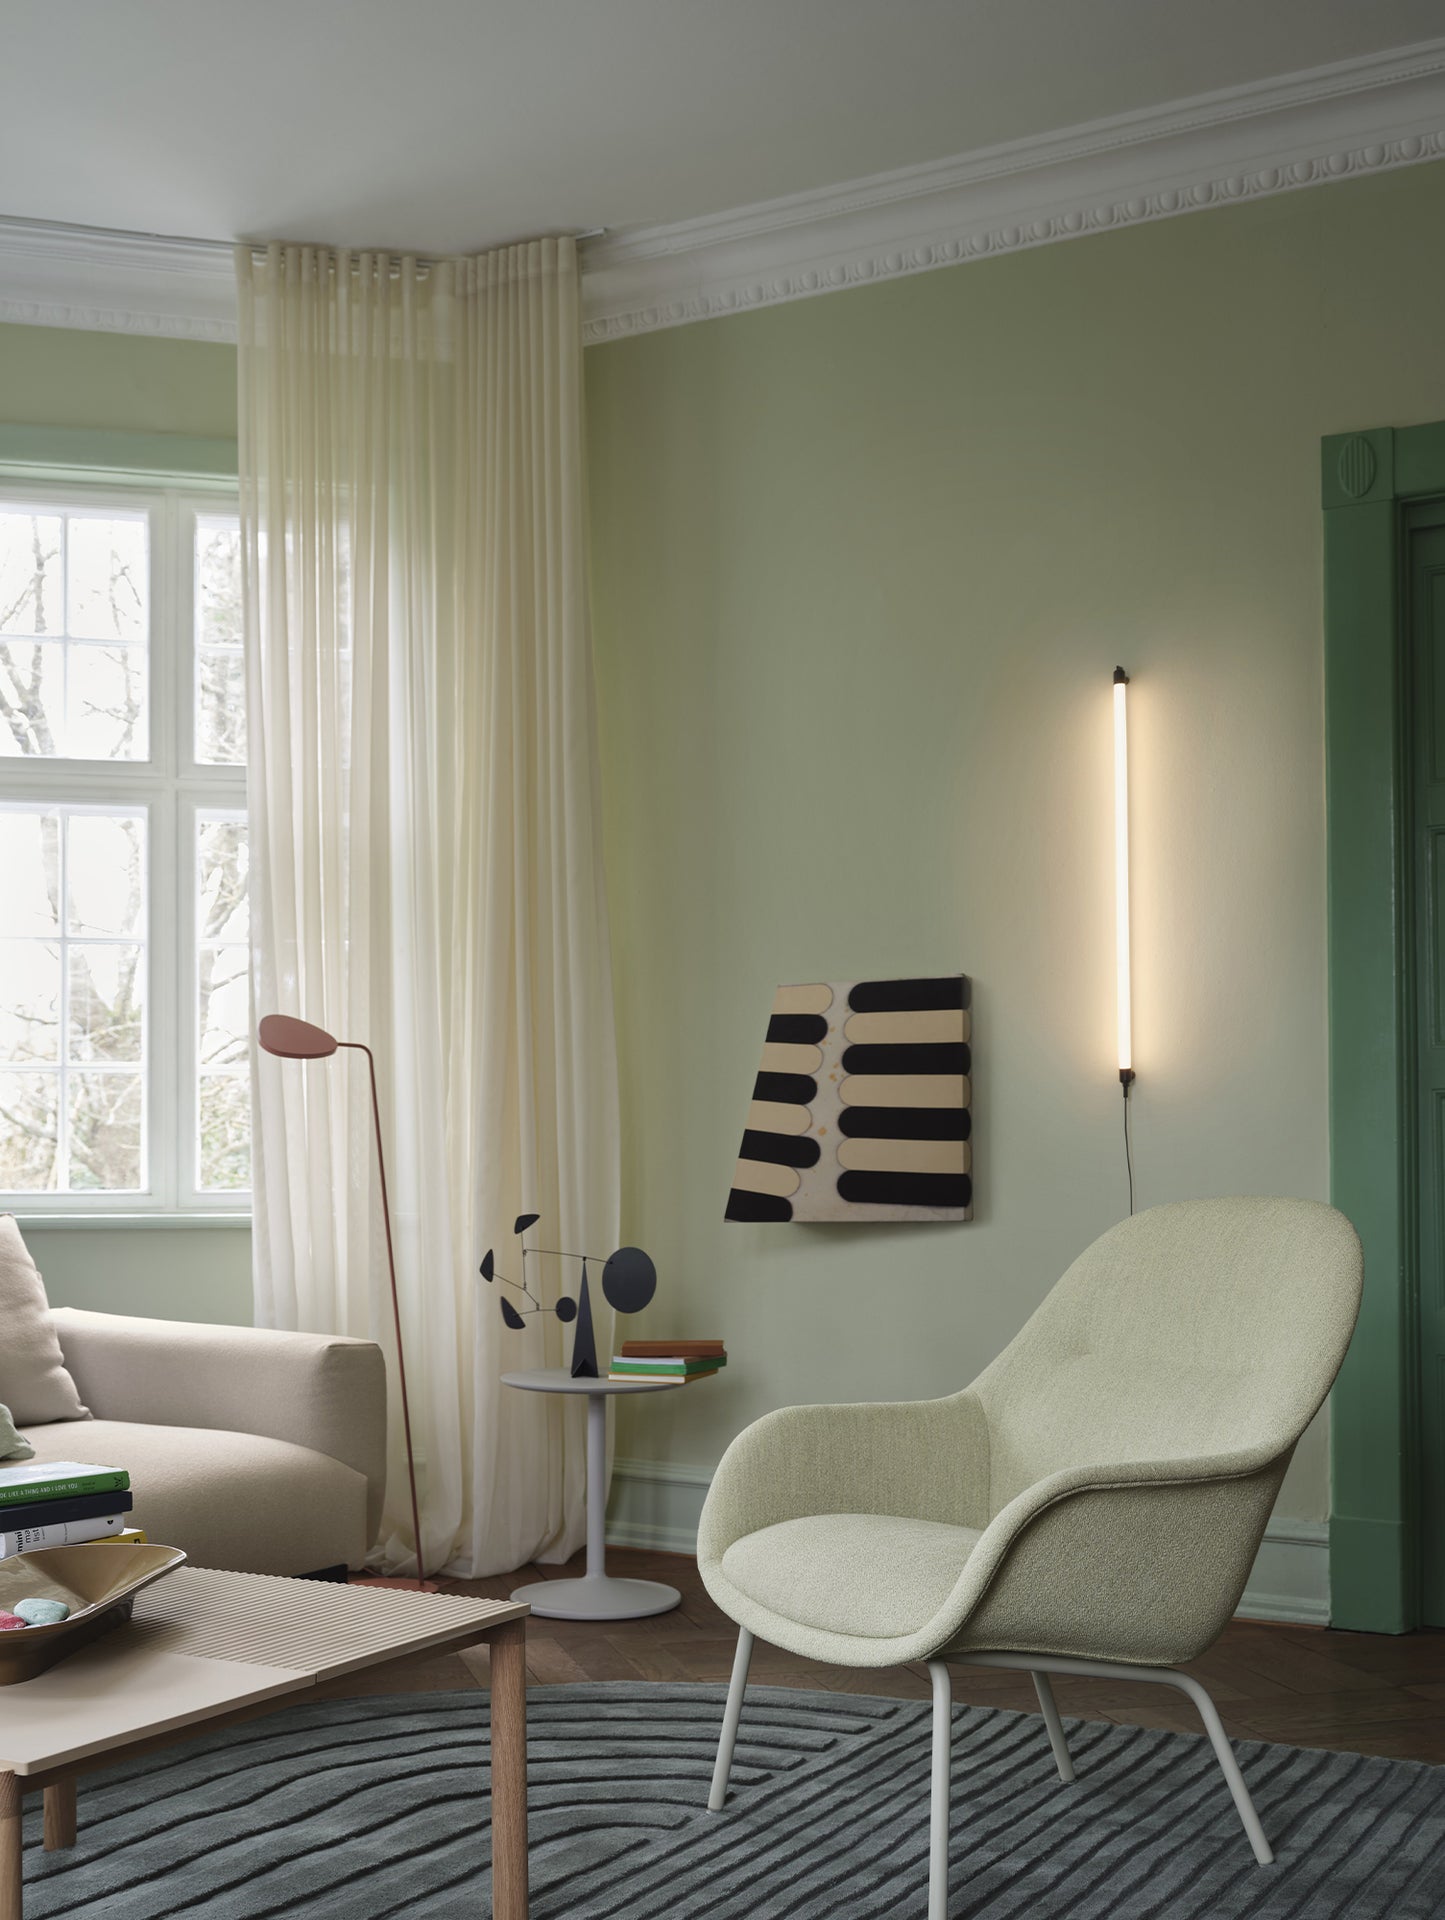 Fine Wall/Ceiling Lamp by Muuto - 90 cm